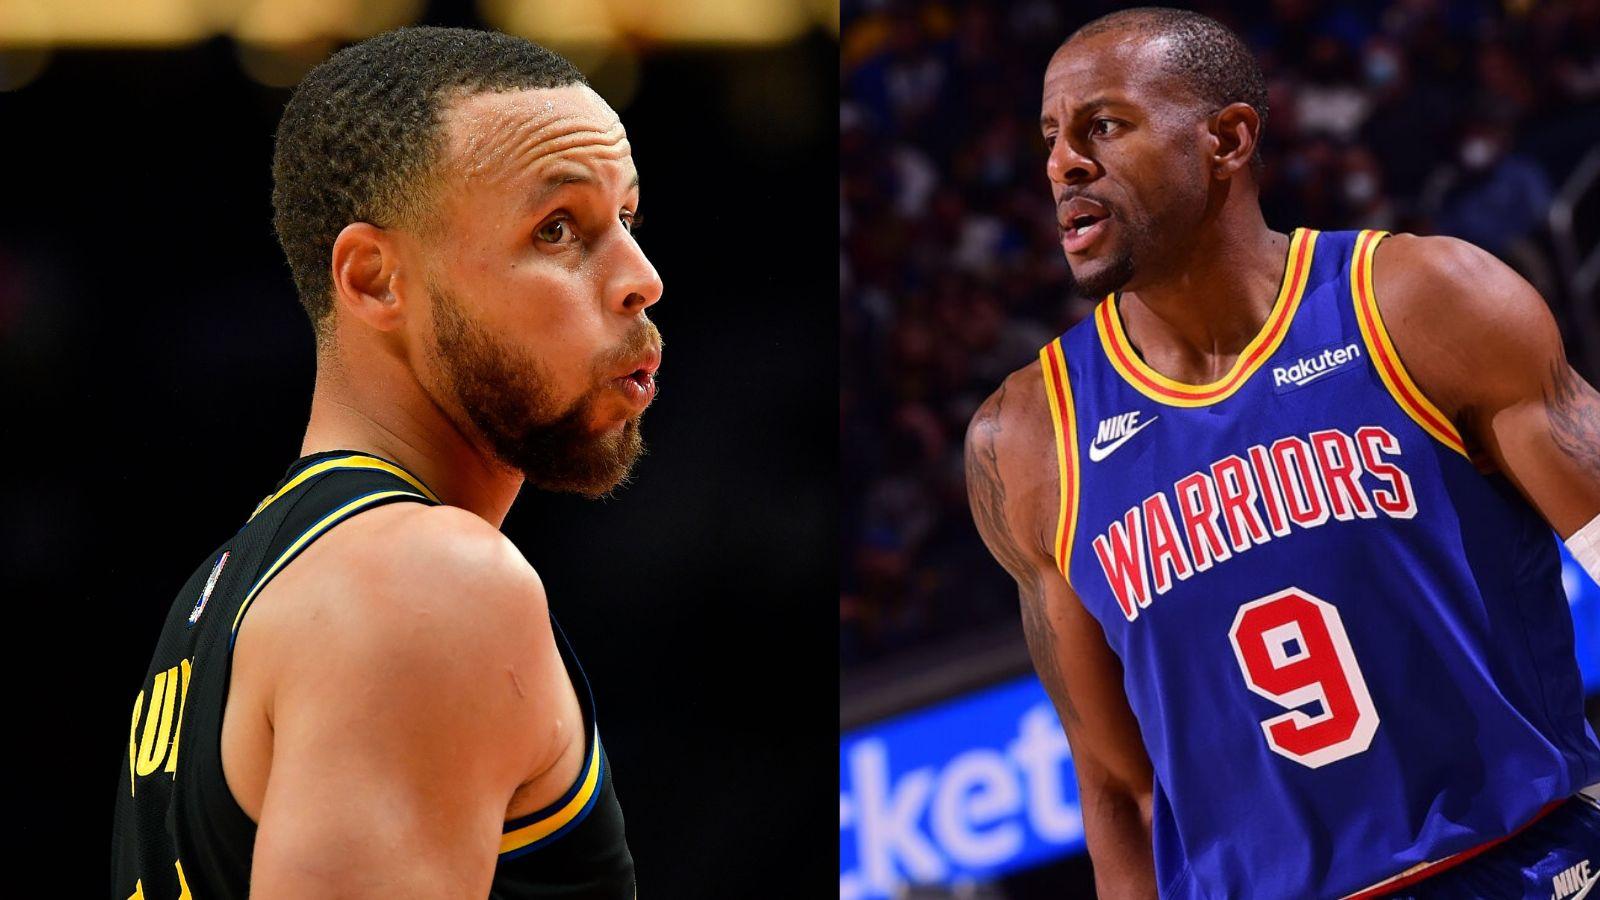 Stephen Curry (left) and Andre Iguodala (right) as members of the Golden State Warriors.